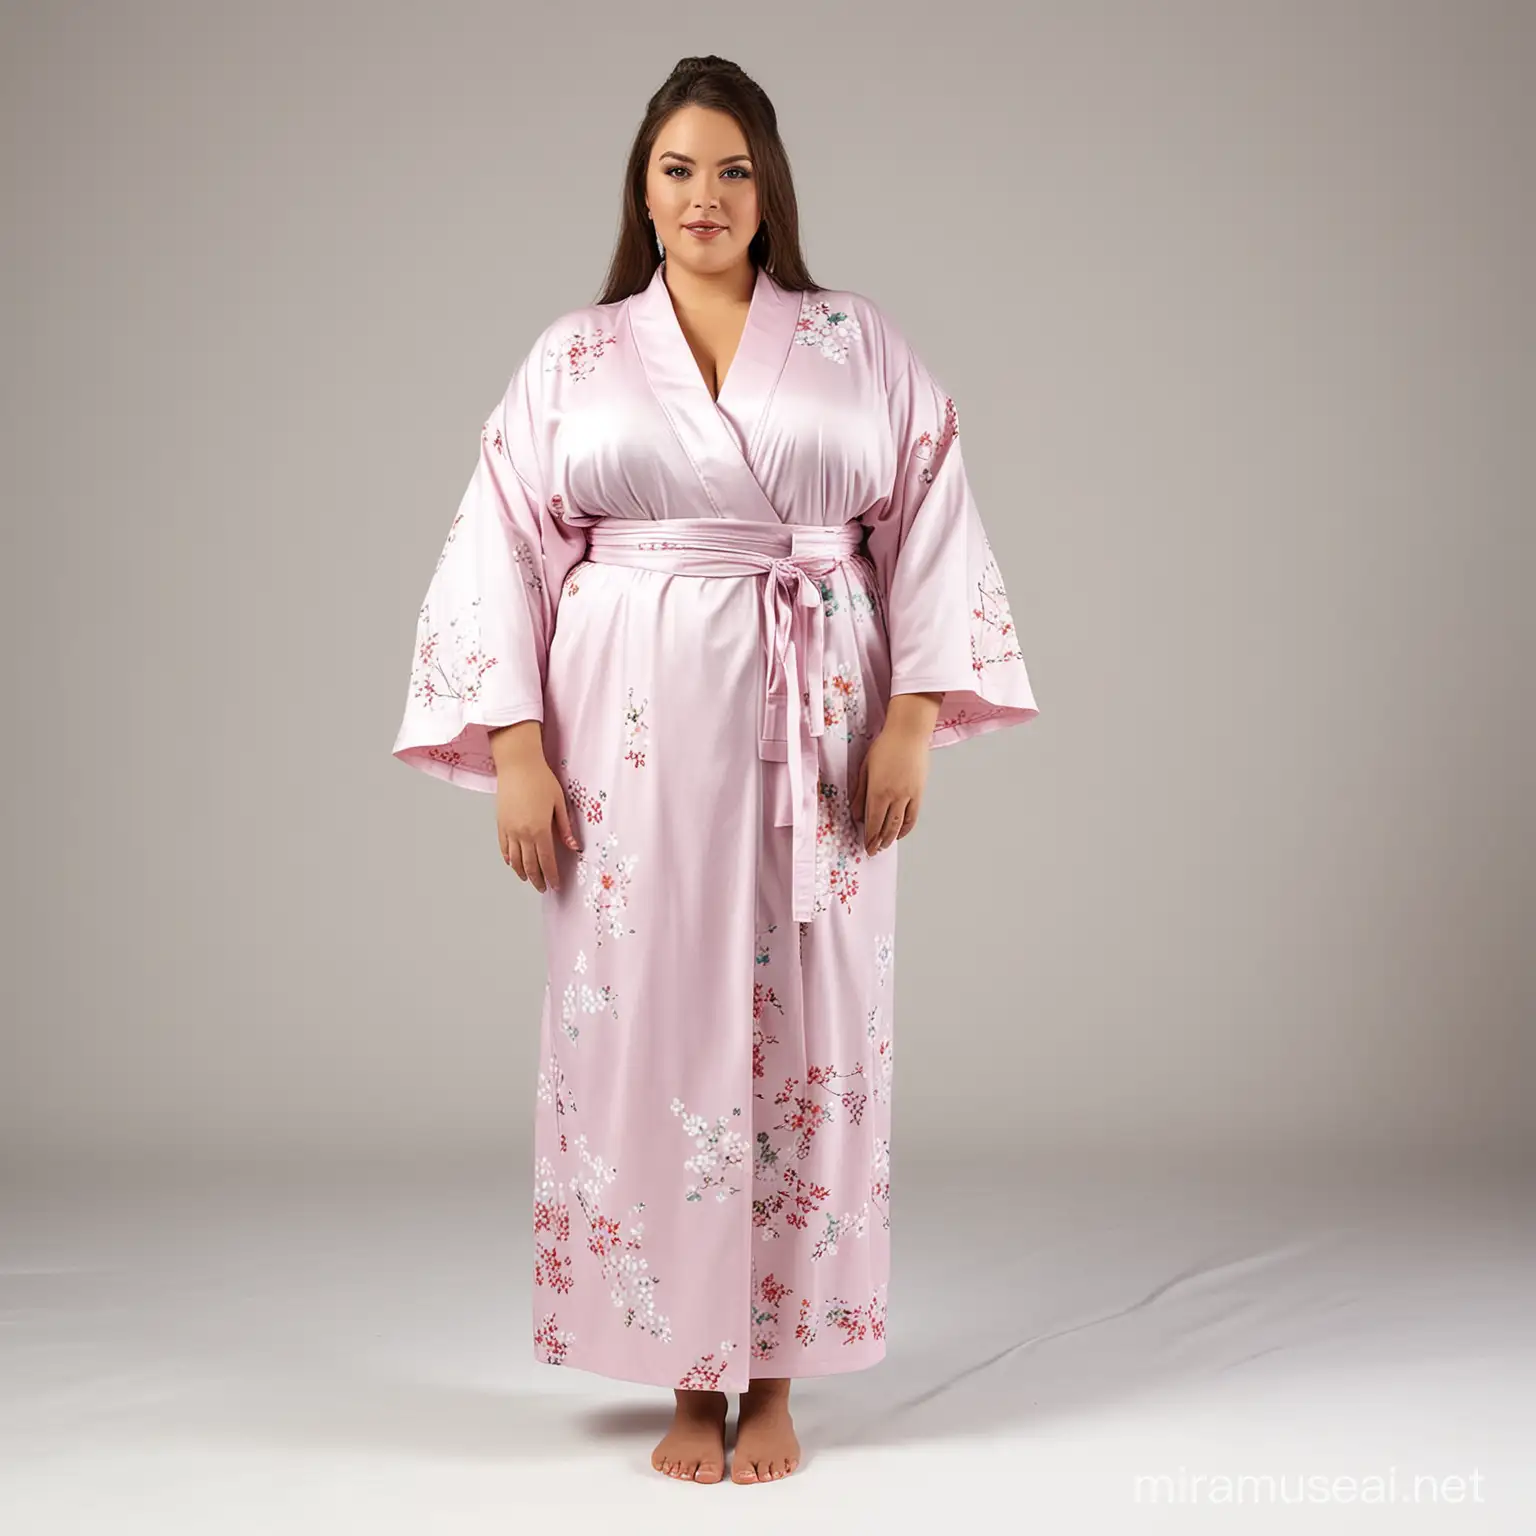 Beautiful PlusSize Woman in Elegant Kimono Embracing Traditional Style and Confidence